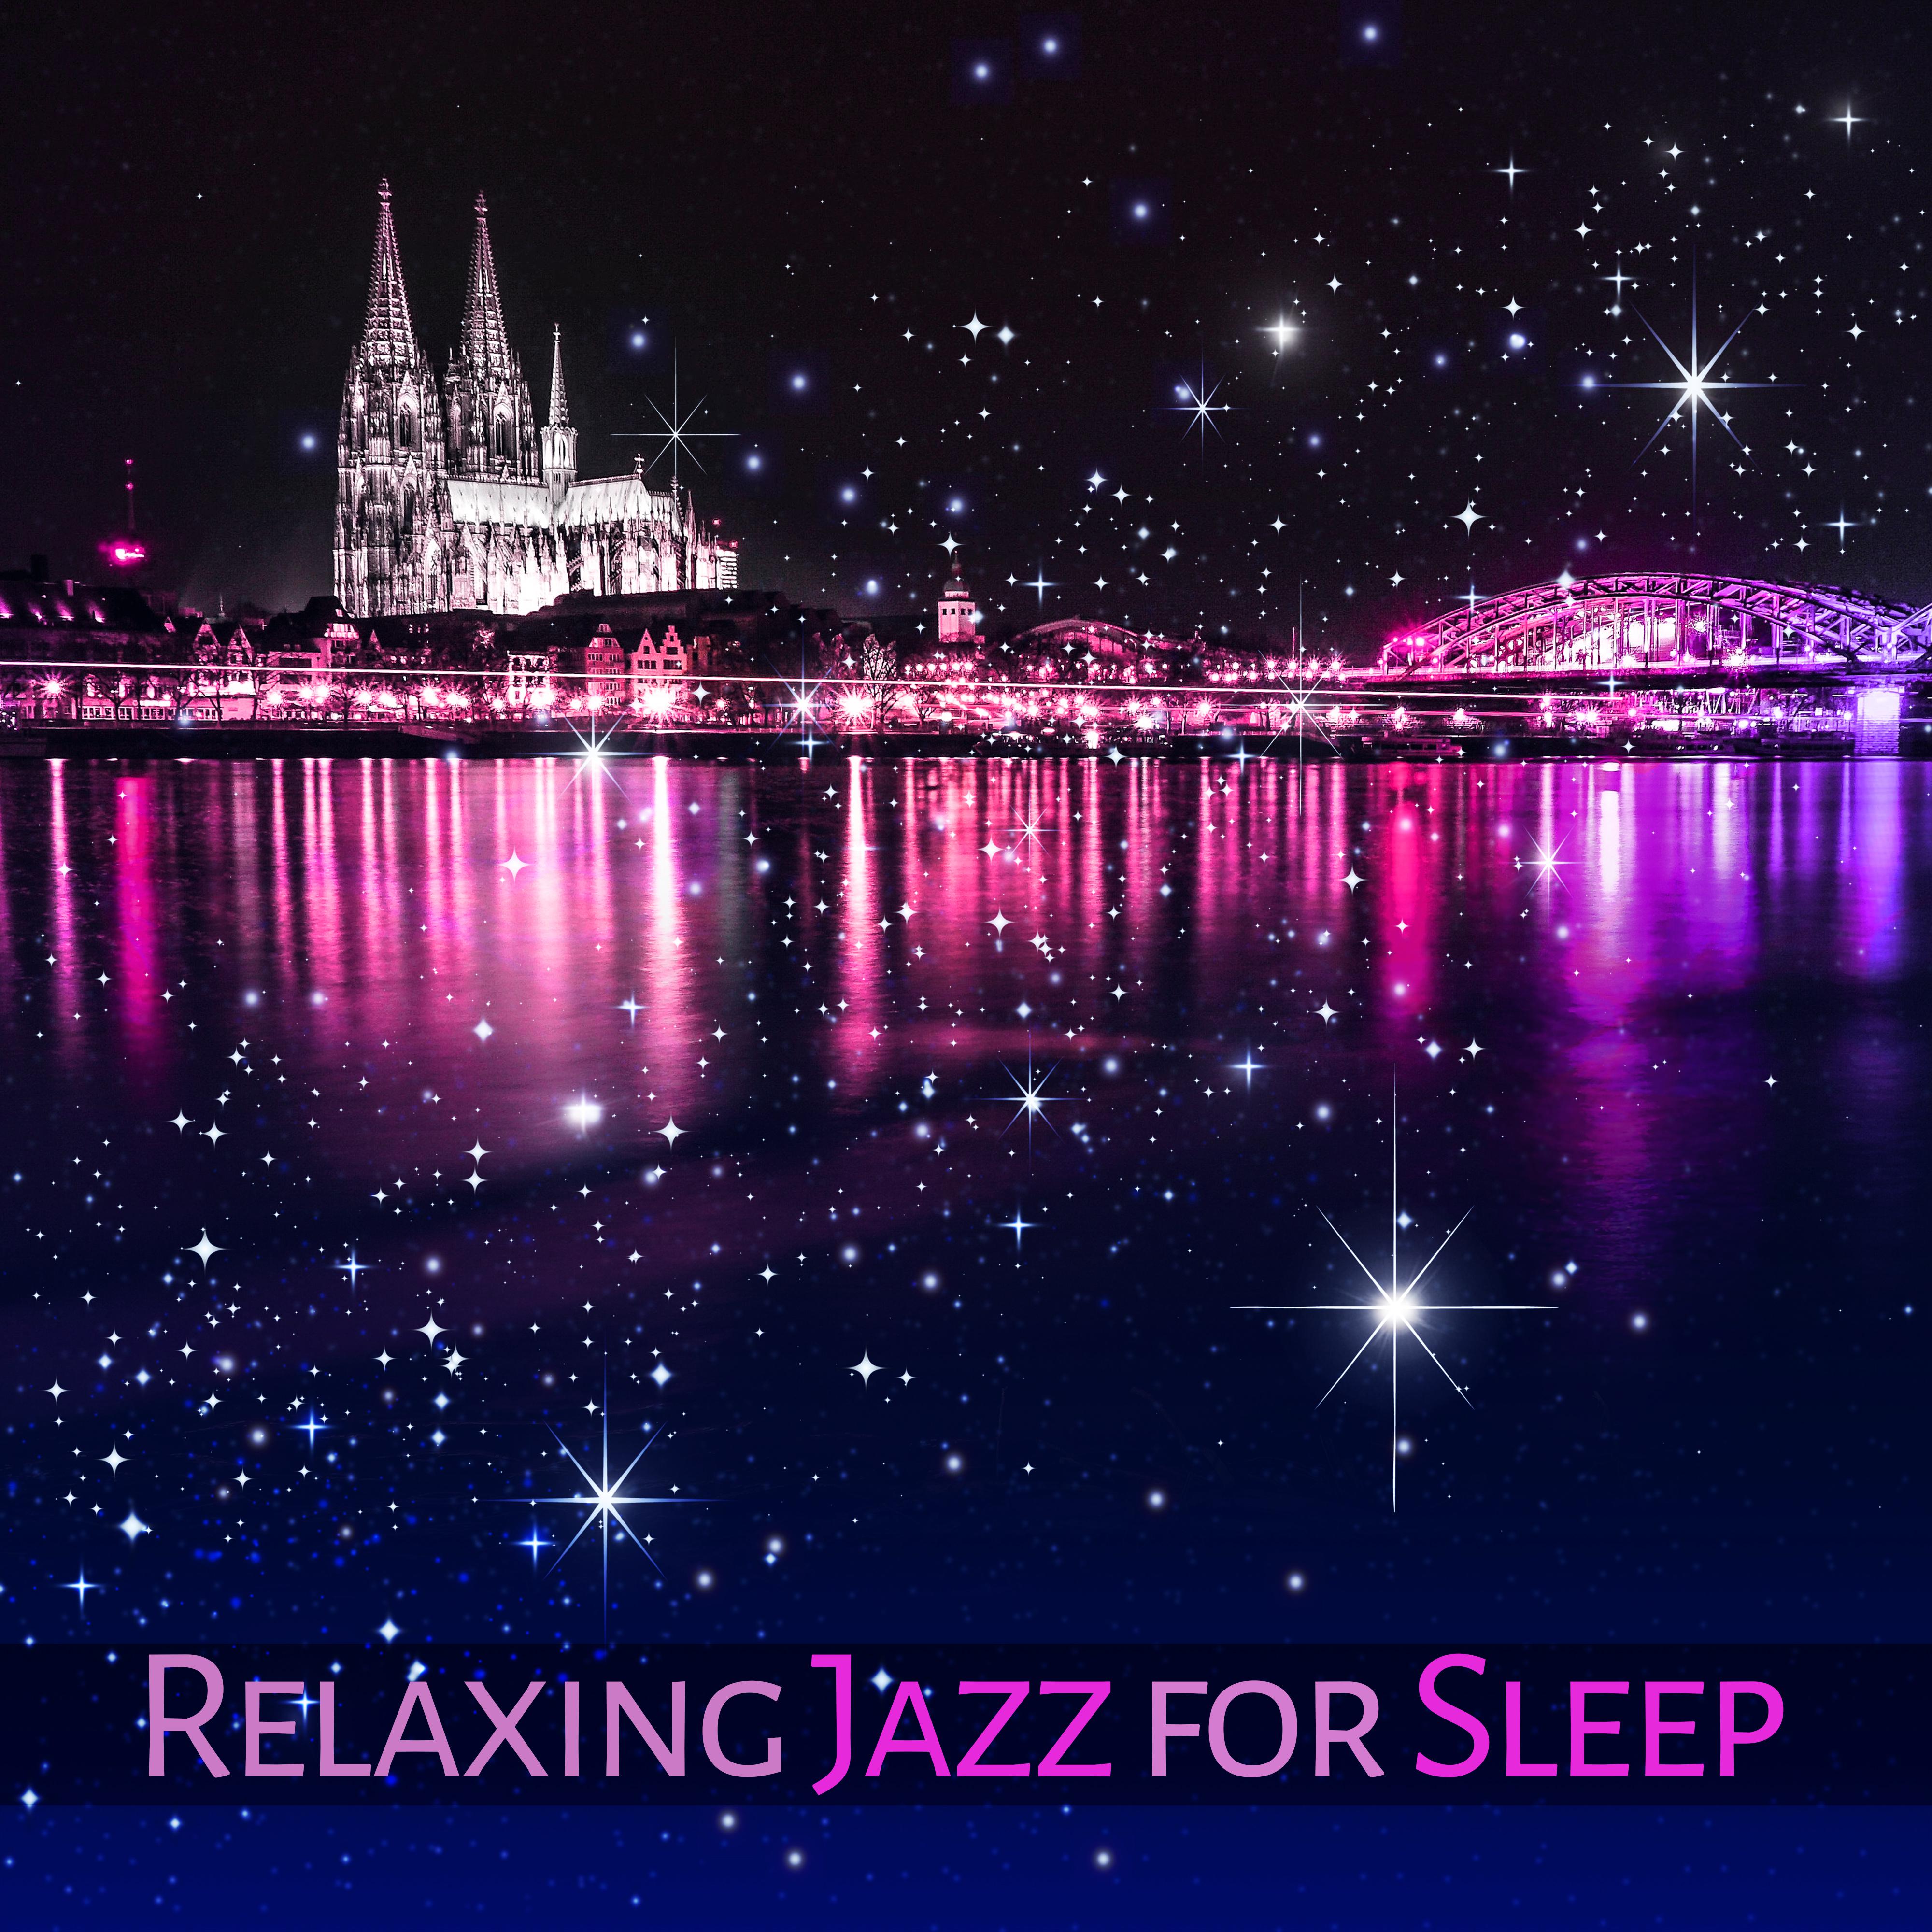 Relaxing Jazz for Sleep – Soothing Sounds, Calm Piano Jazz, Smooth Moves, Evening Relaxation